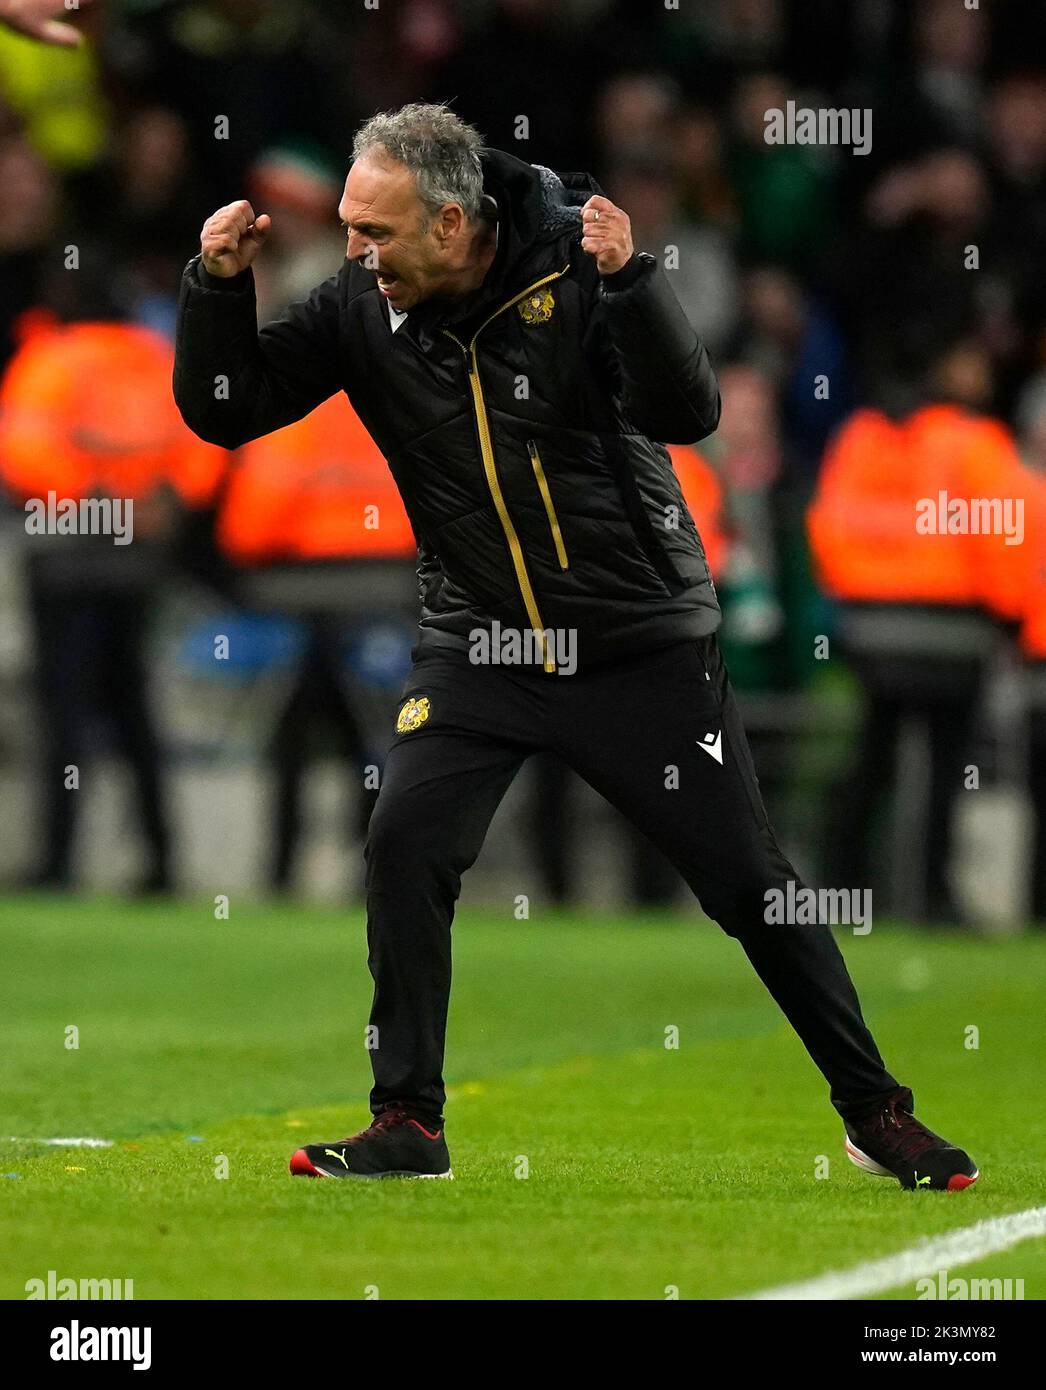 Armenia head coach Joaquin Caparros reacts during the UEFA Nations League match at the Aviva Stadium in Dublin, Ireland. Picture date: Tuesday September 27, 2022. Stock Photo